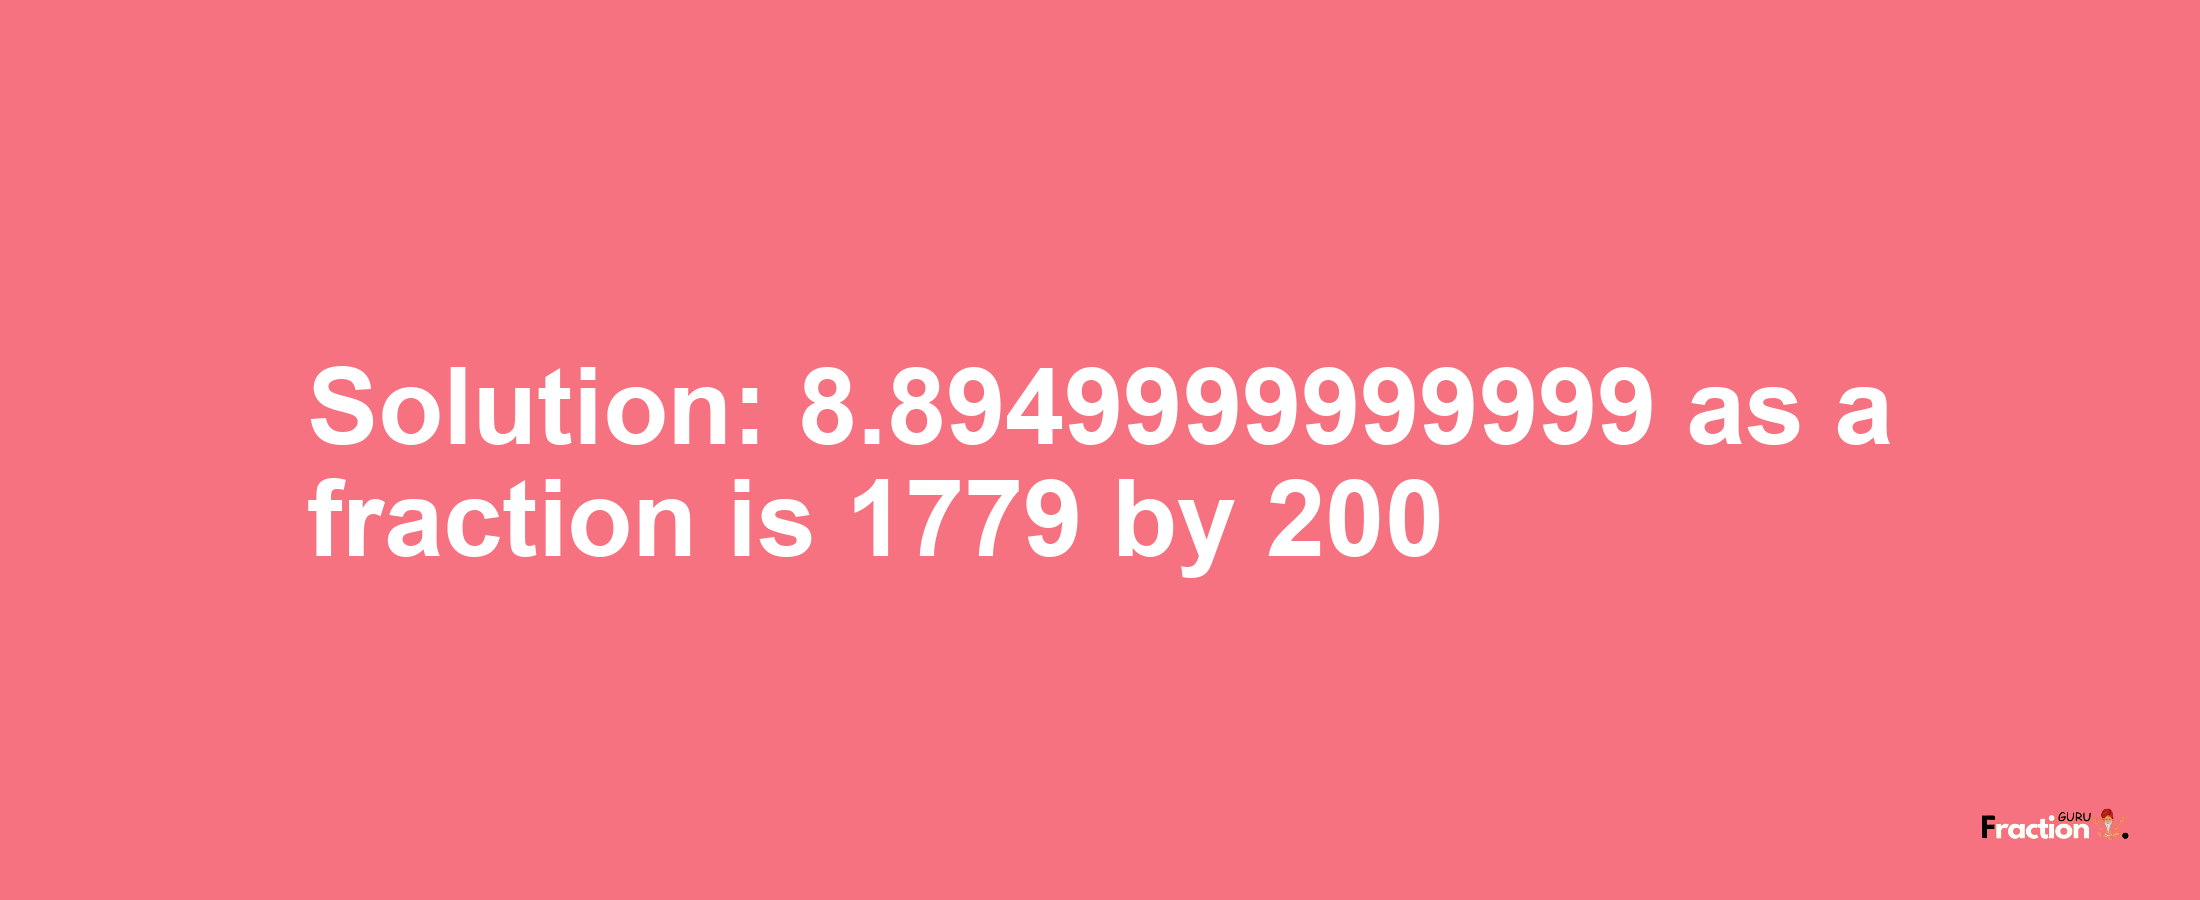 Solution:8.8949999999999 as a fraction is 1779/200